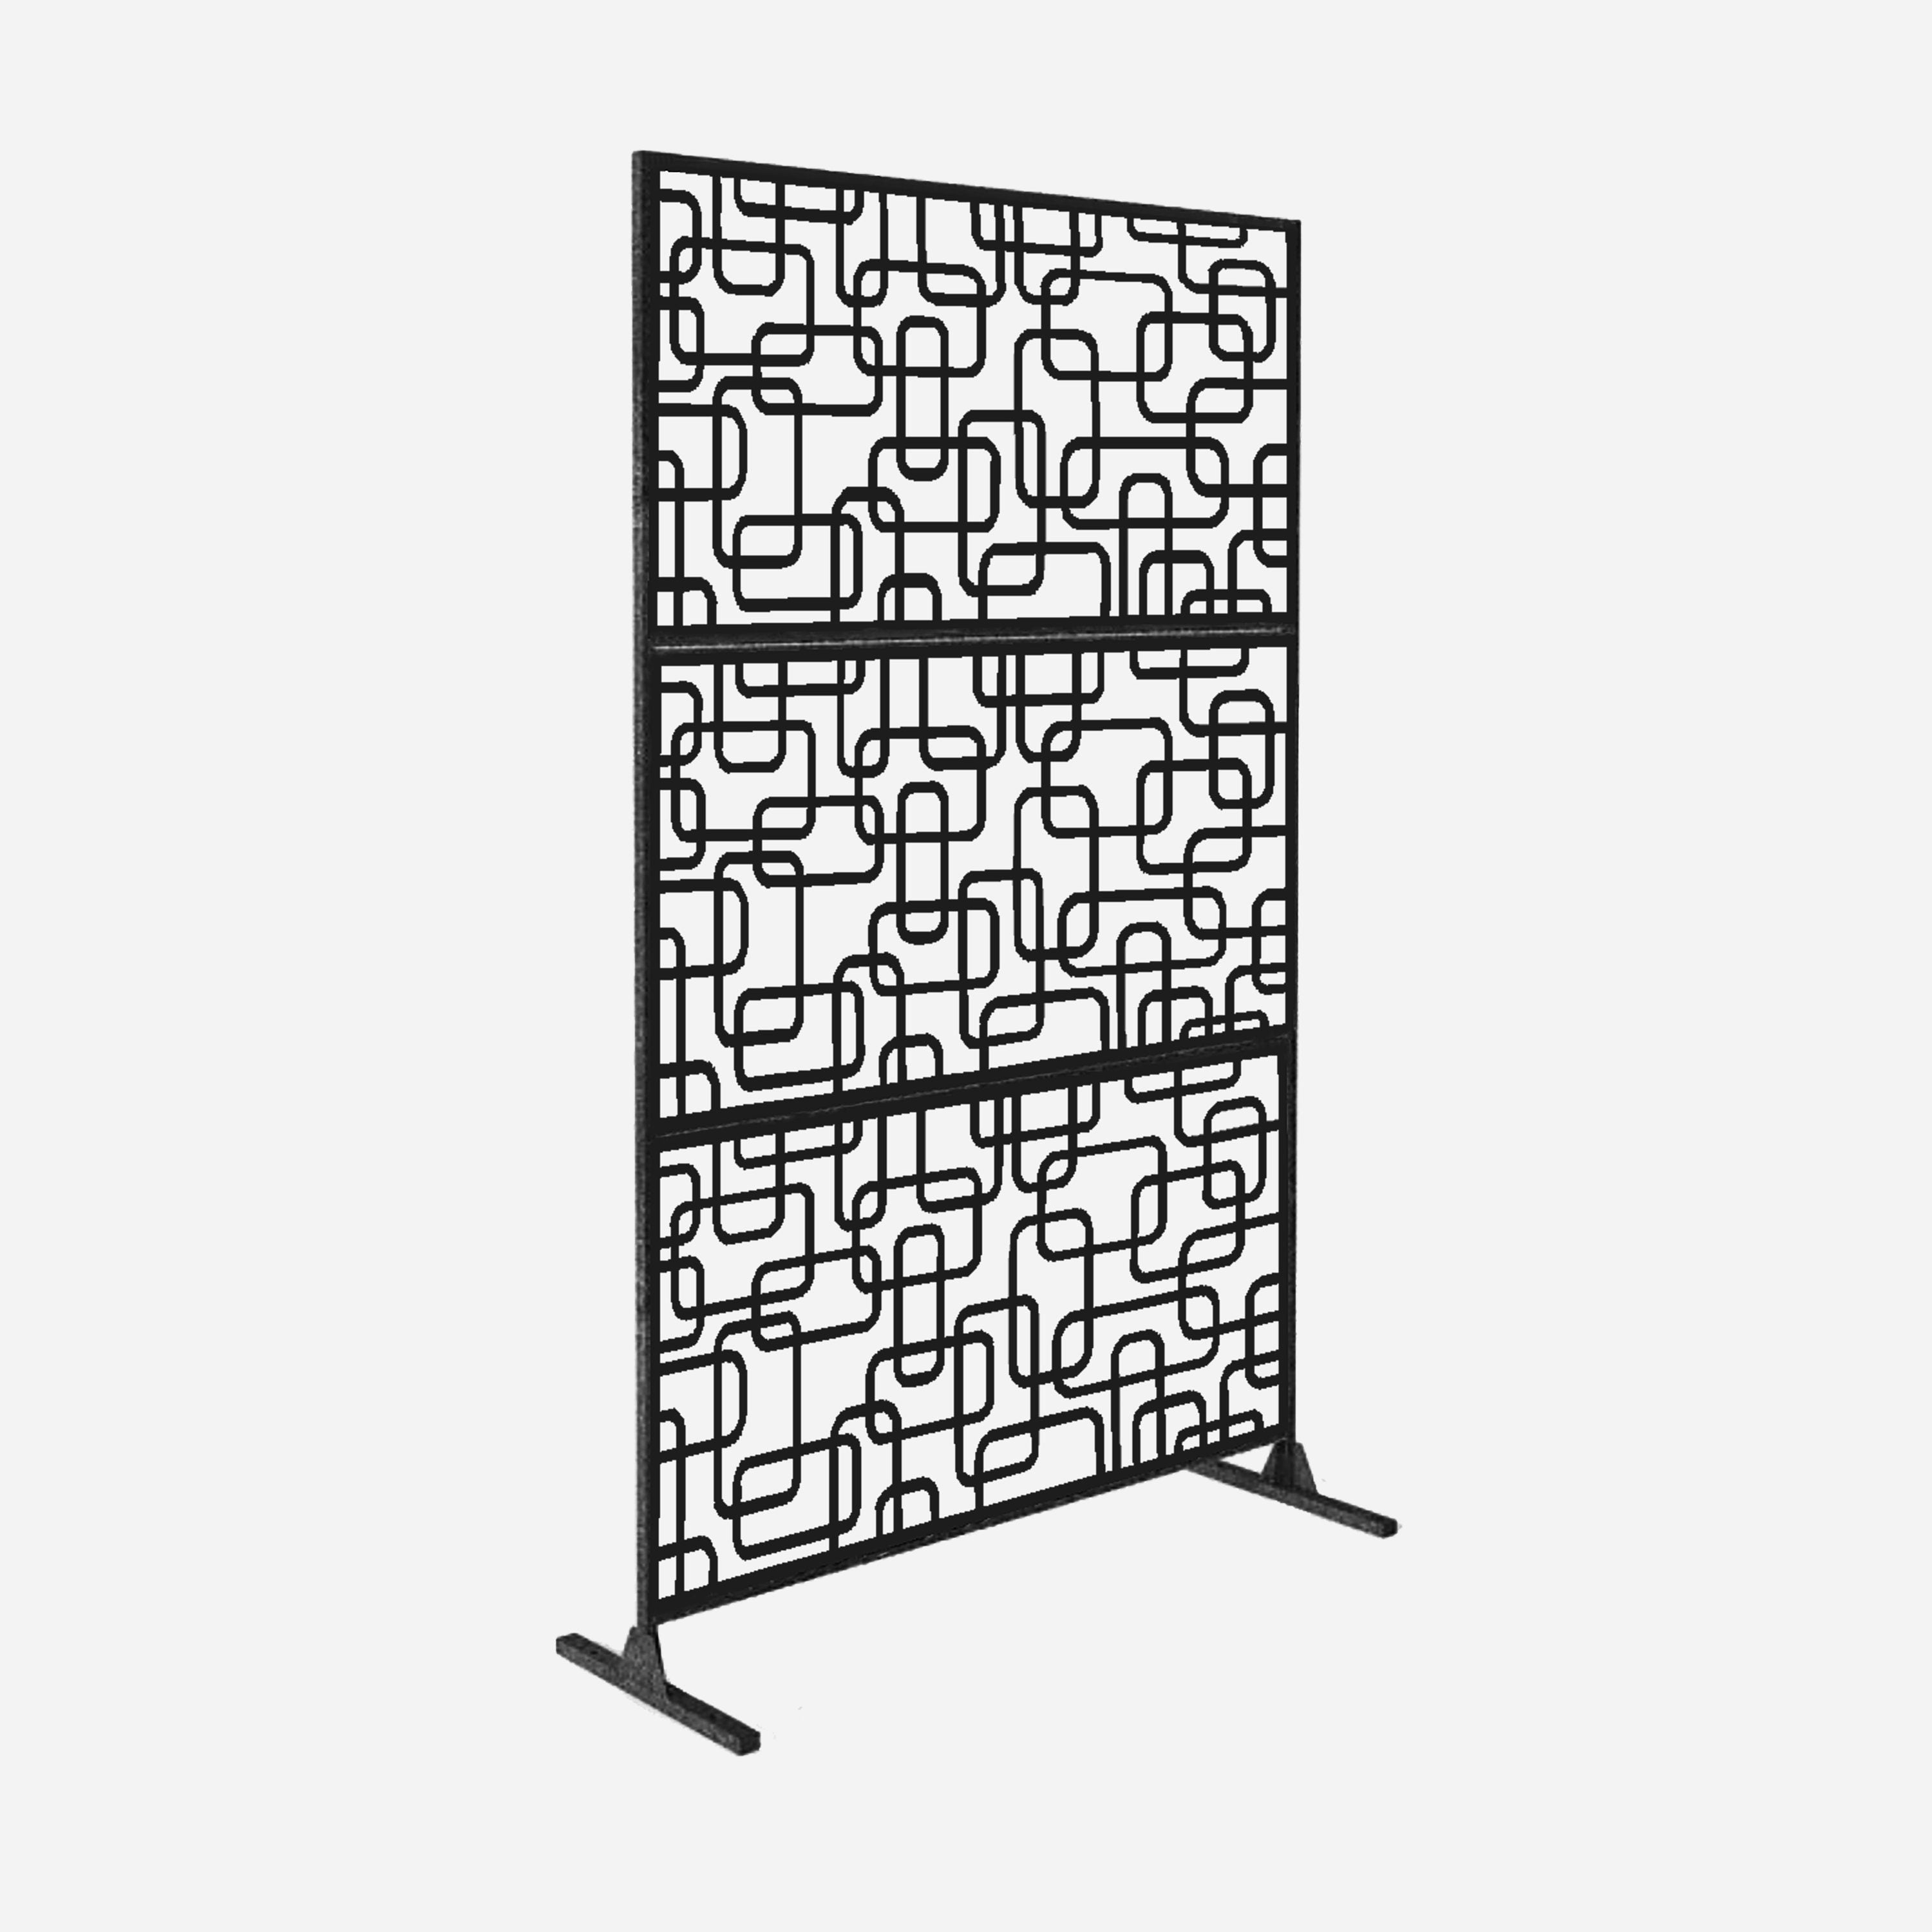 Metal Privacy Screen, Laser Cut Decorative Steel Privacy Panel Metal Fencing, Hanging Room Divider Partitions Panel Screen,48x75inch C002